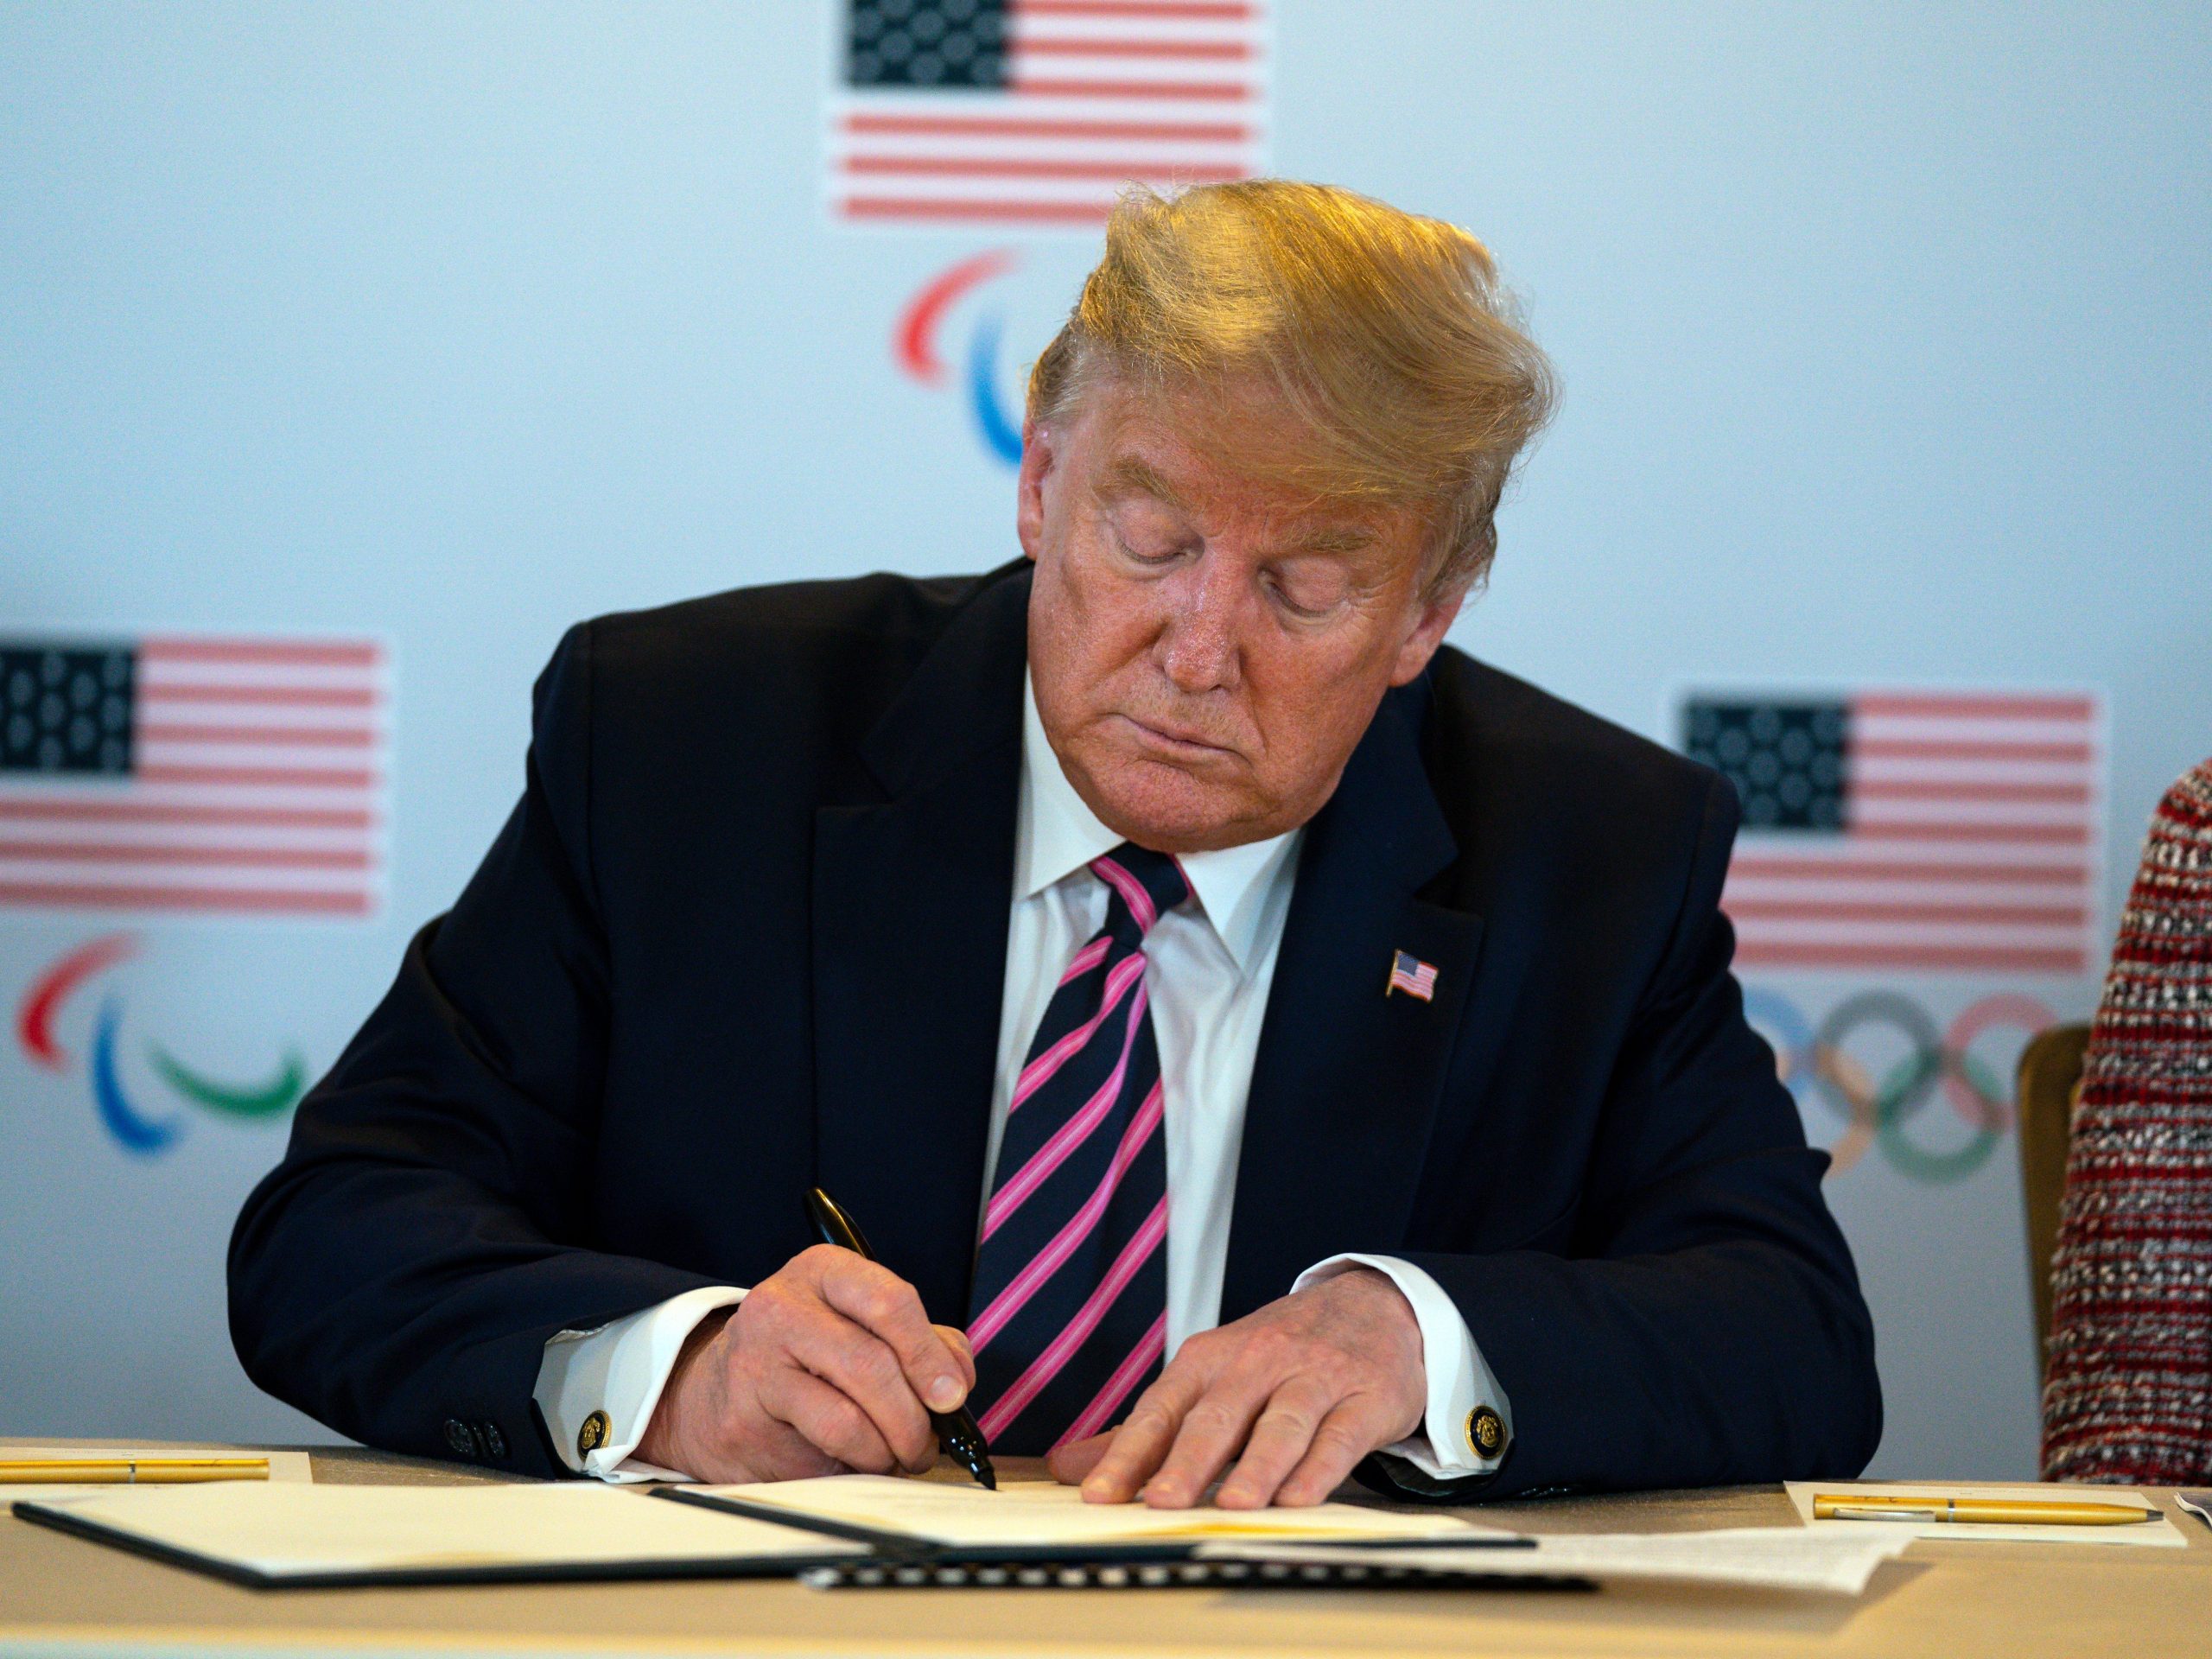 Trump signs a document